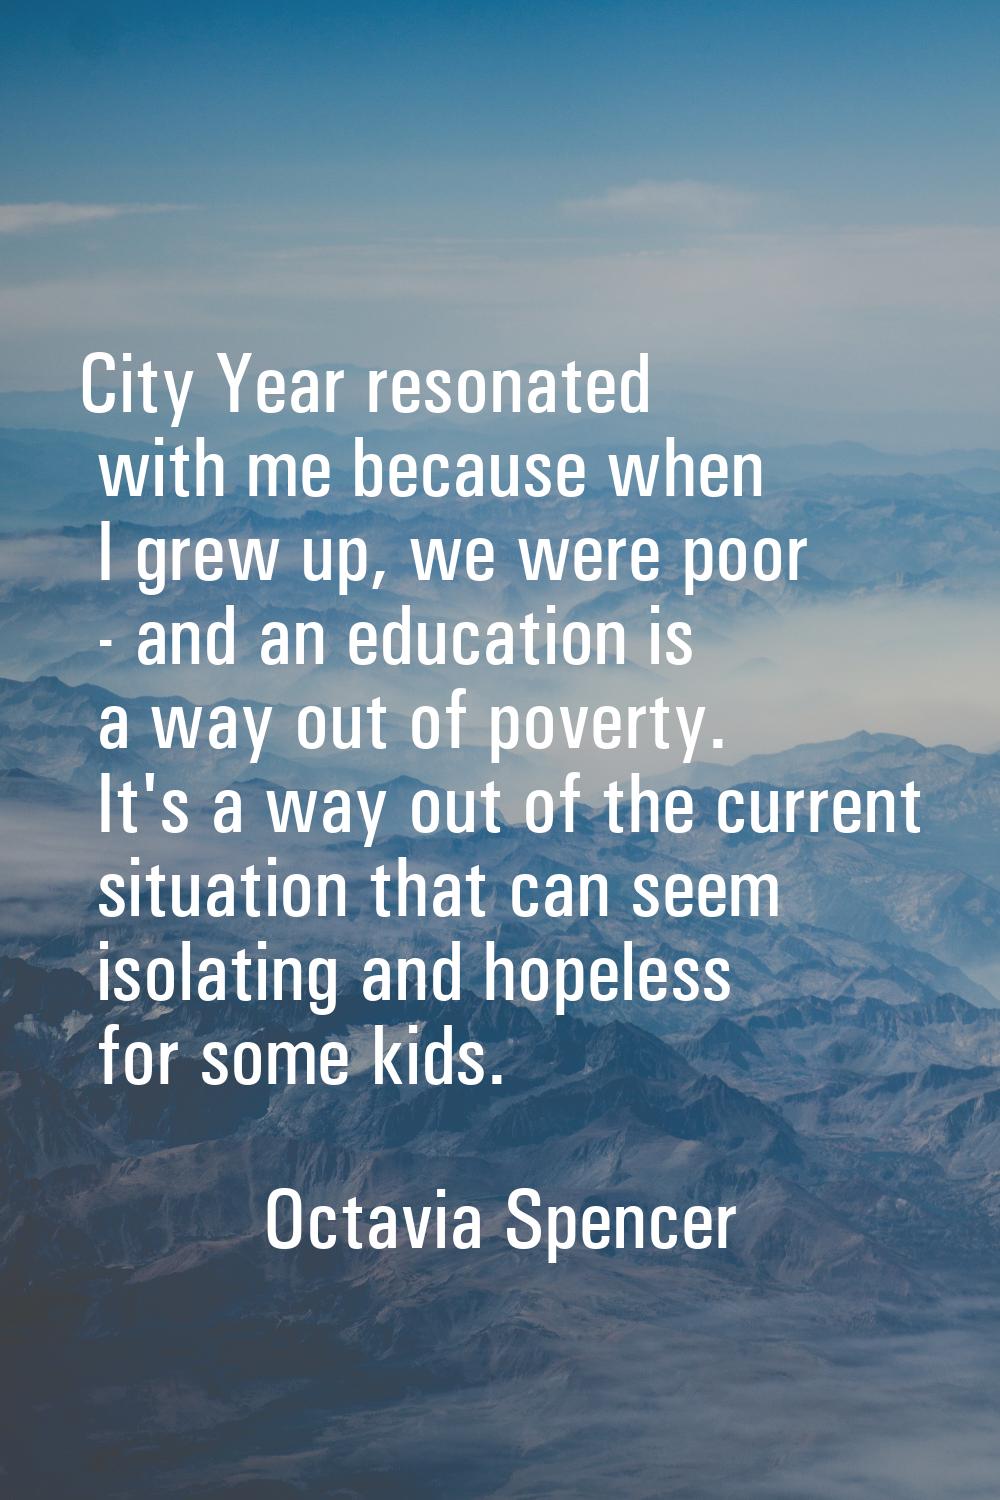 City Year resonated with me because when I grew up, we were poor - and an education is a way out of